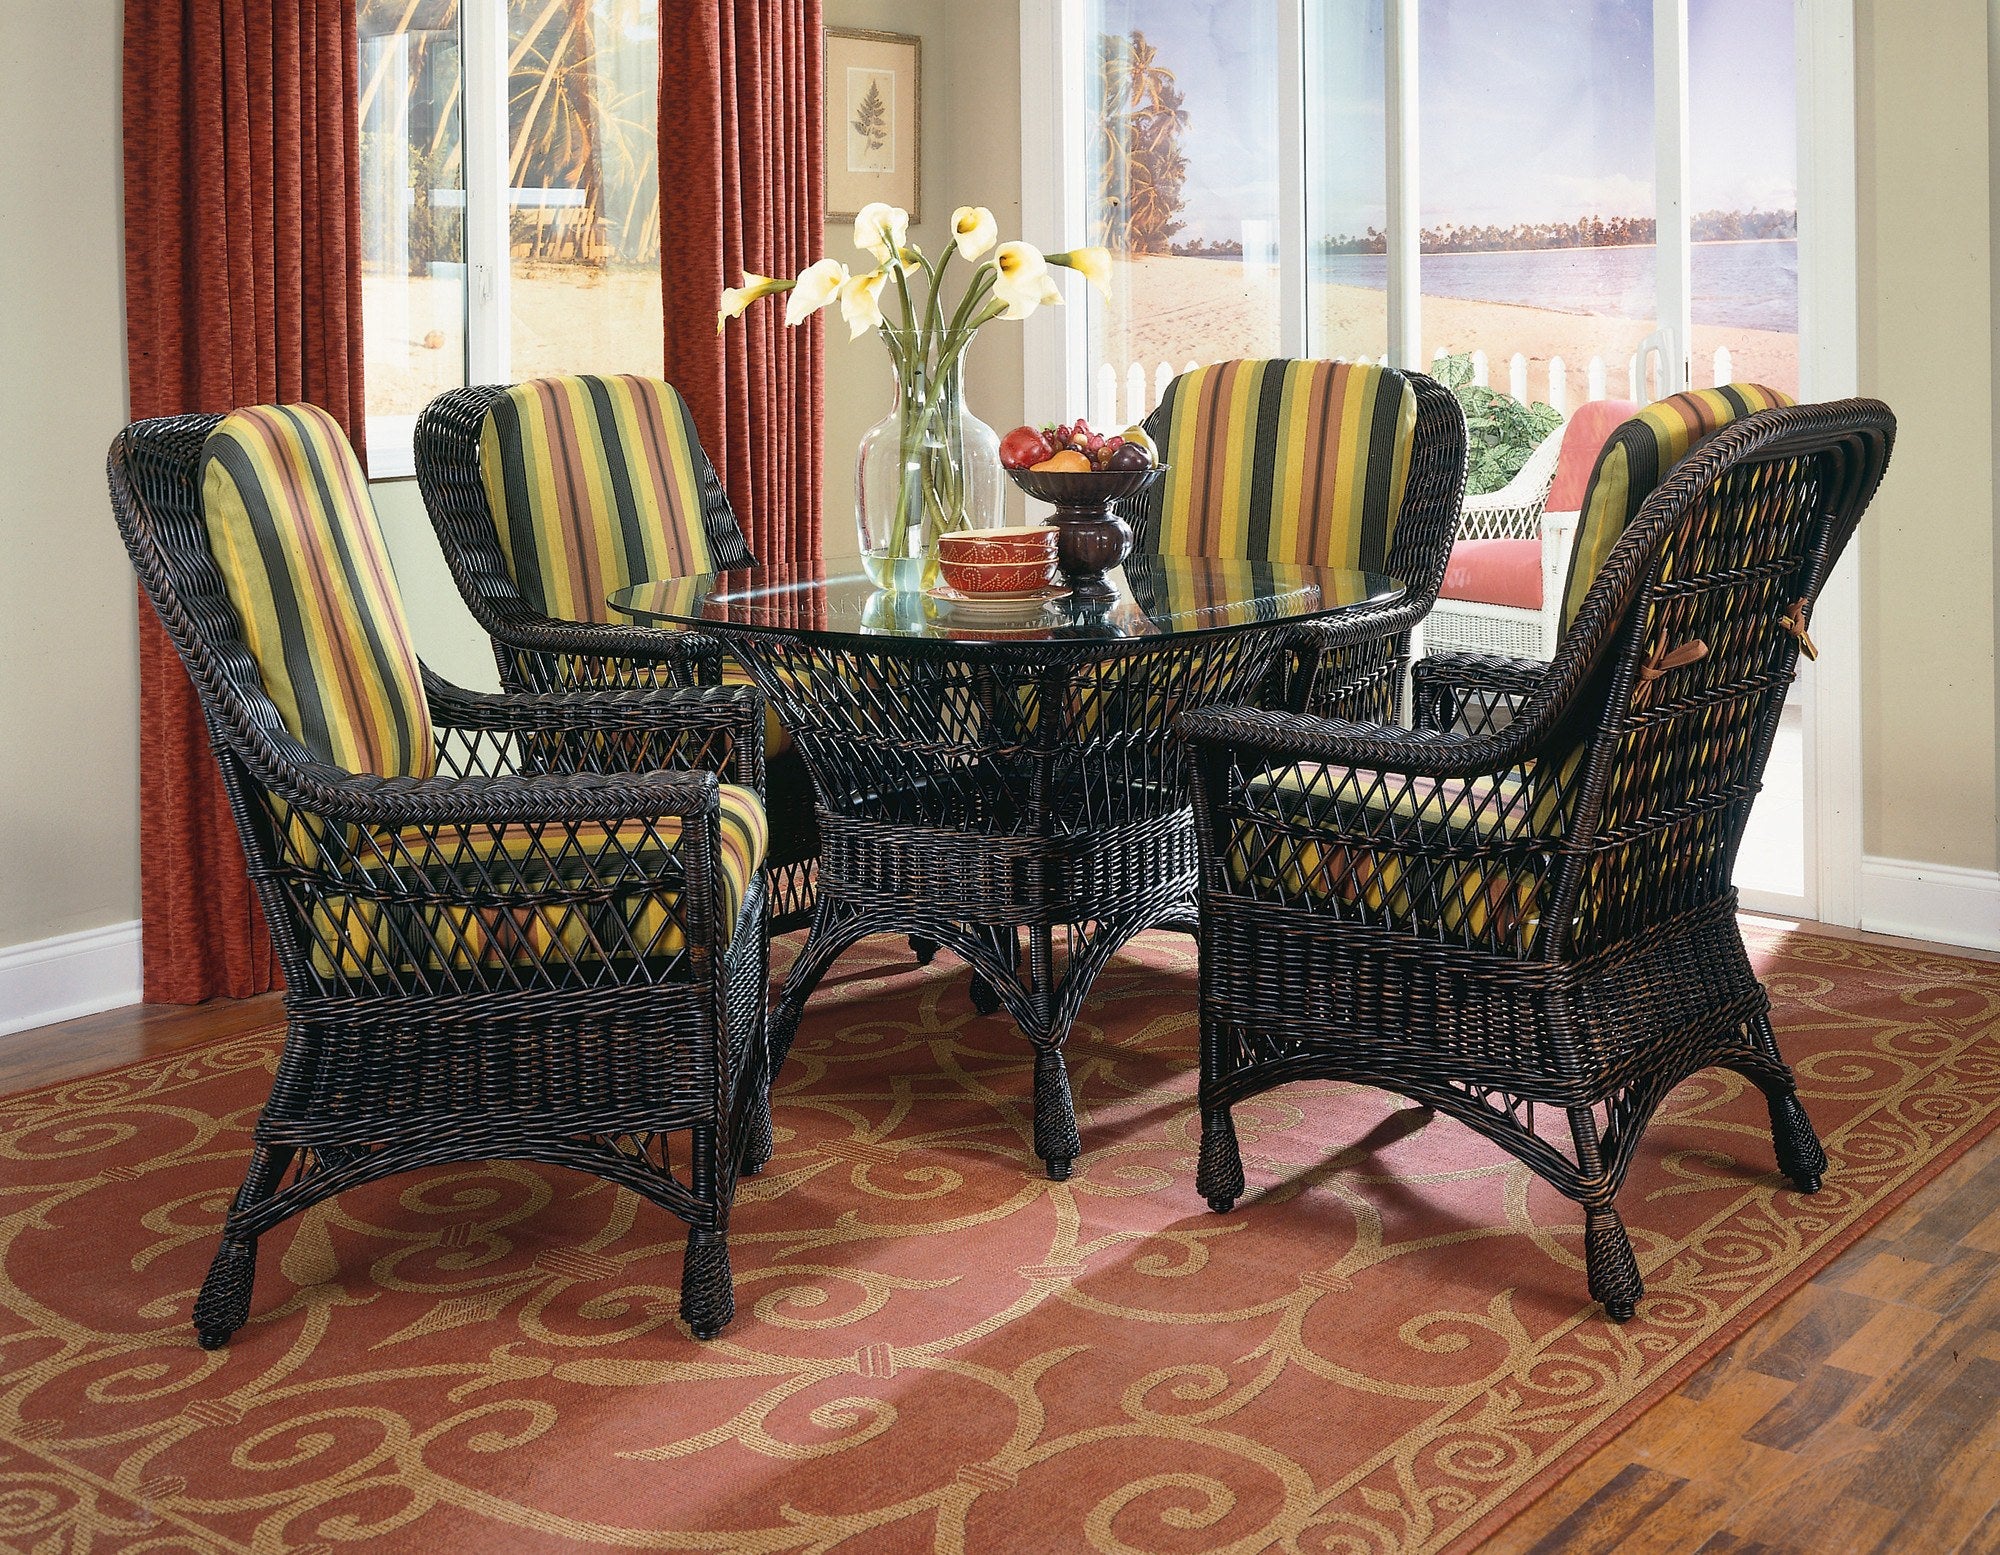 Designer Wicker & Rattan By Tribor Harbor Front Dining Arm Chair by Designer Wicker from Tribor Dining Chair - Rattan Imports